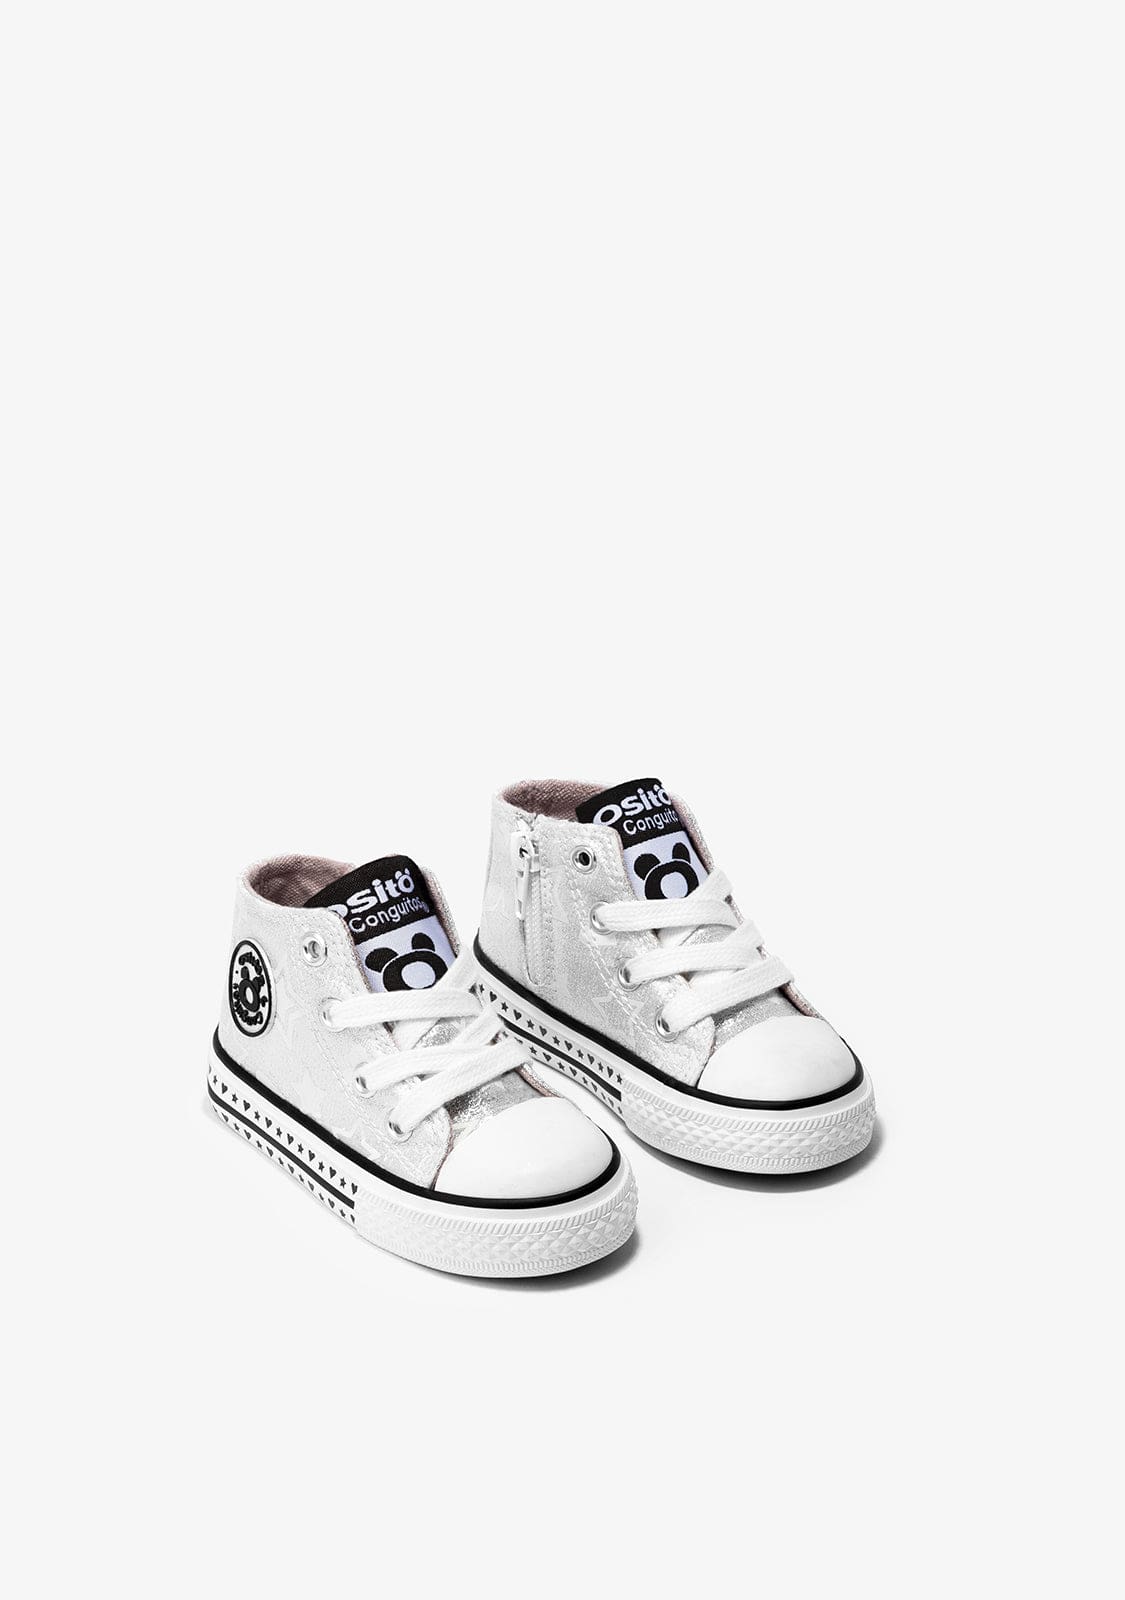 OSITO Shoes Baby's Silver Glows in the Dark High-Top Sneakers